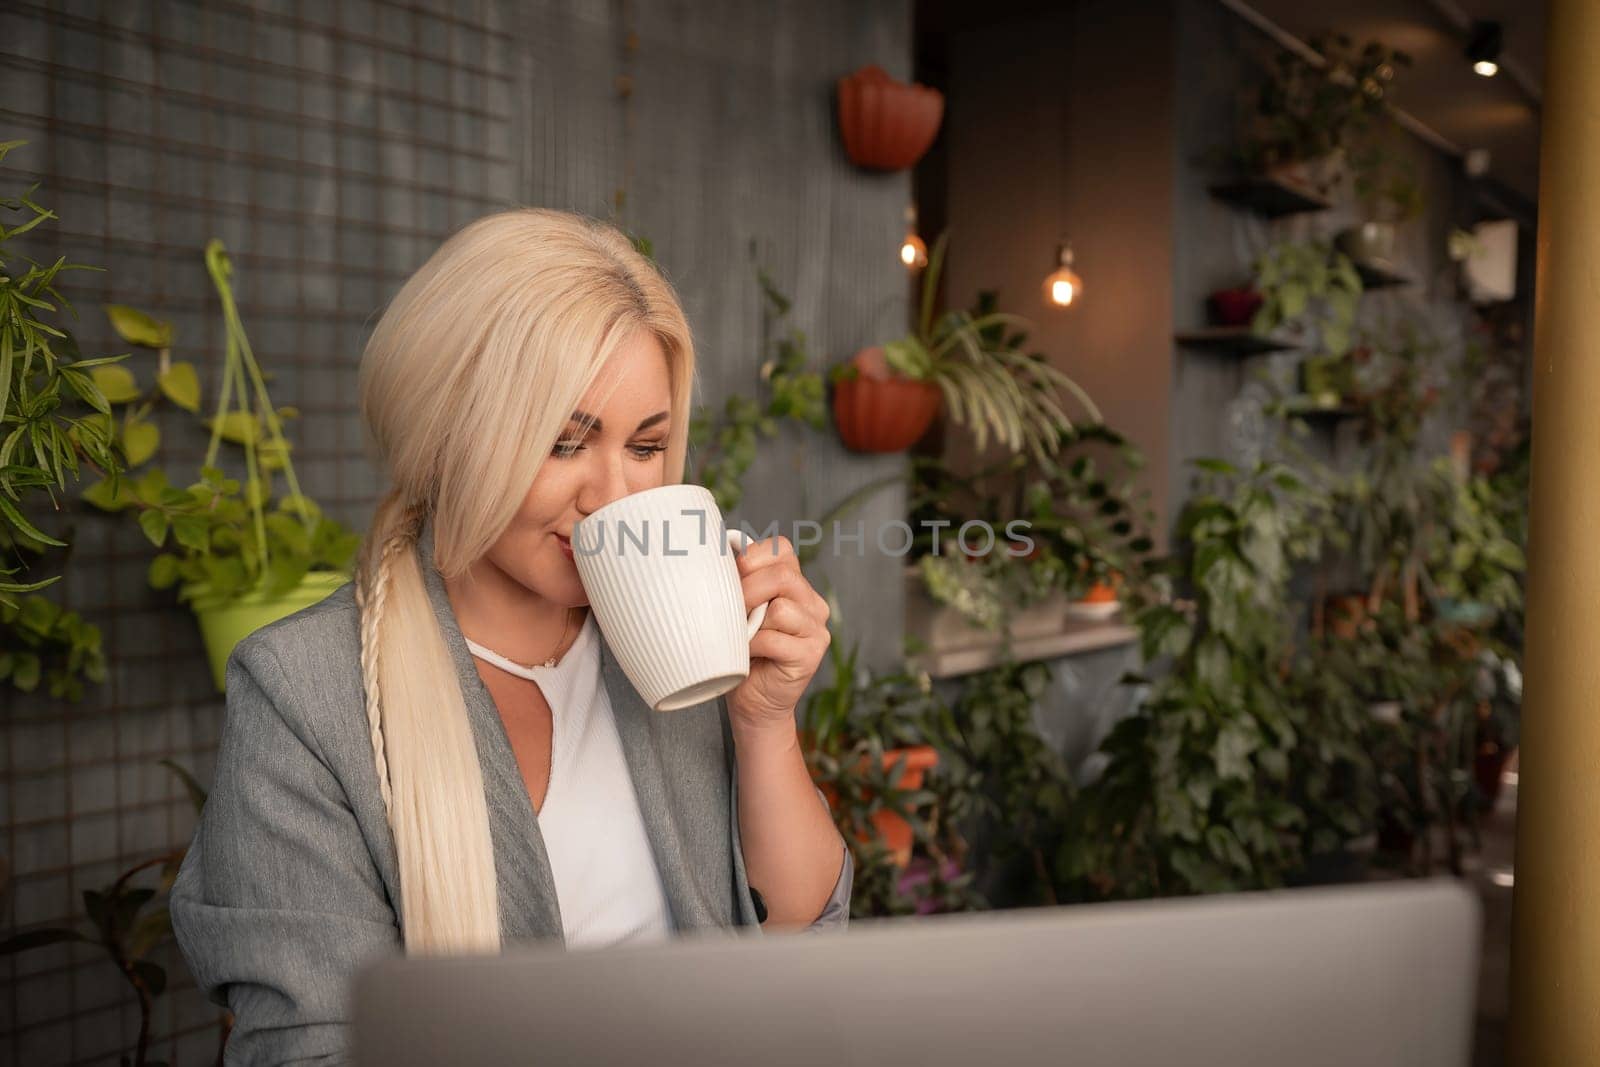 A blonde woman is sitting at a table with a laptop and a white coffee cup. She is drinking coffee while working on her laptop